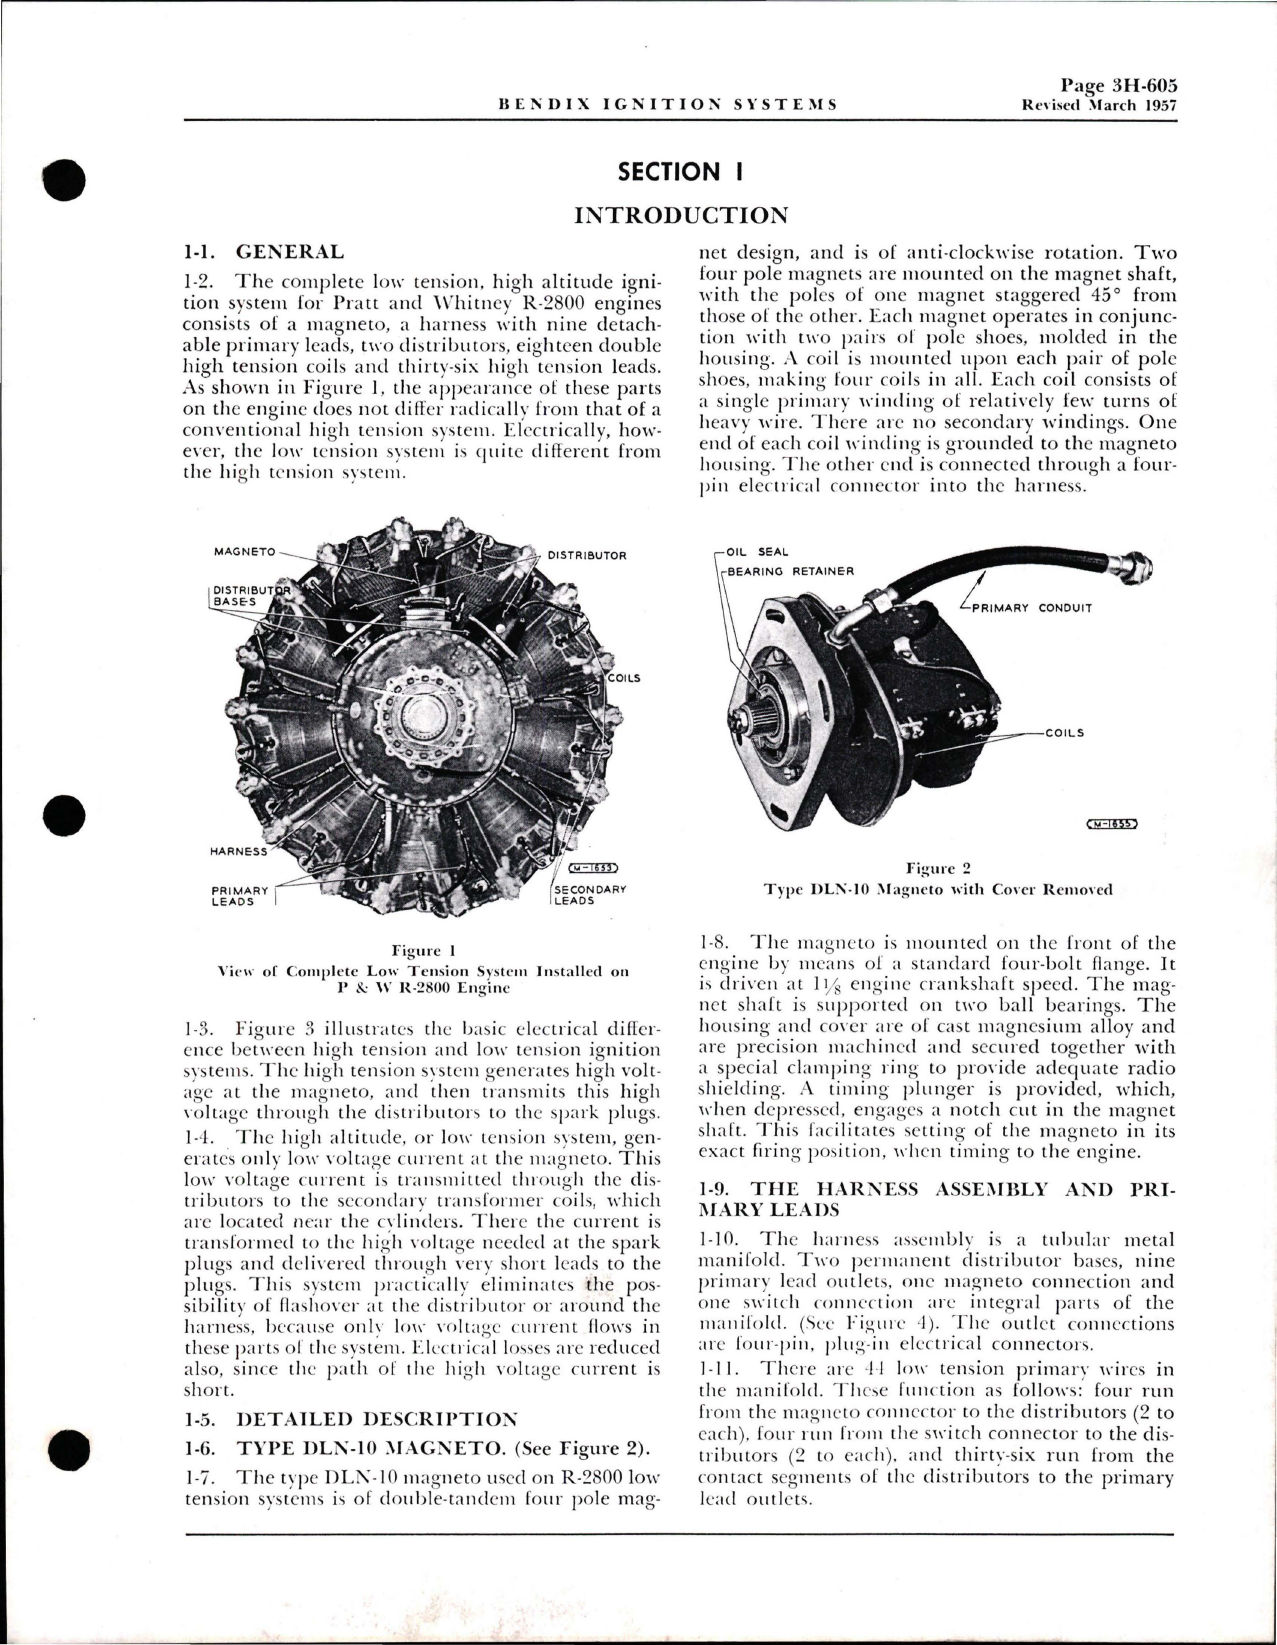 Sample page 5 from AirCorps Library document: Overhaul Instructions for Low Tension - High Altitude Ignition System